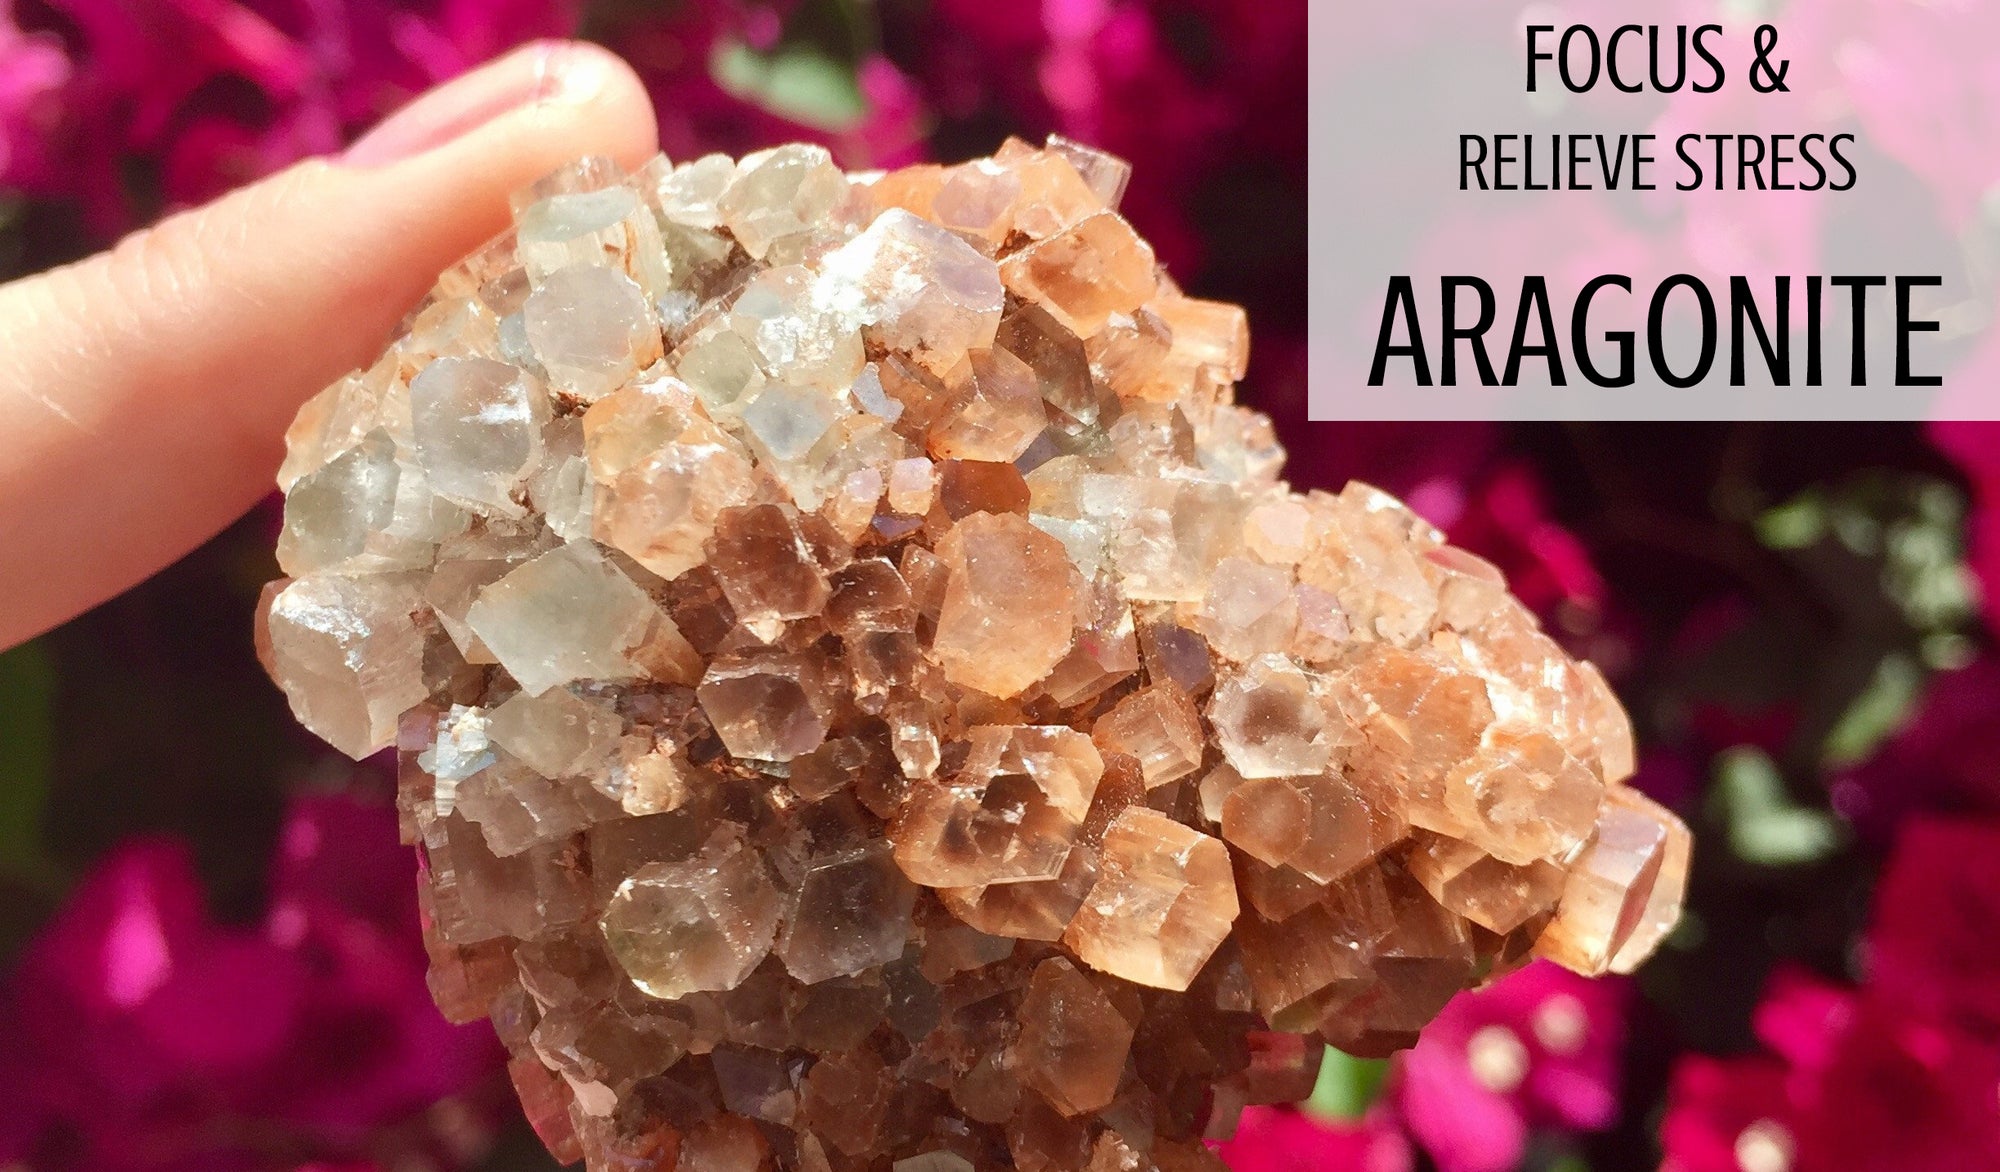 Learn More about Aragonite and its meanings